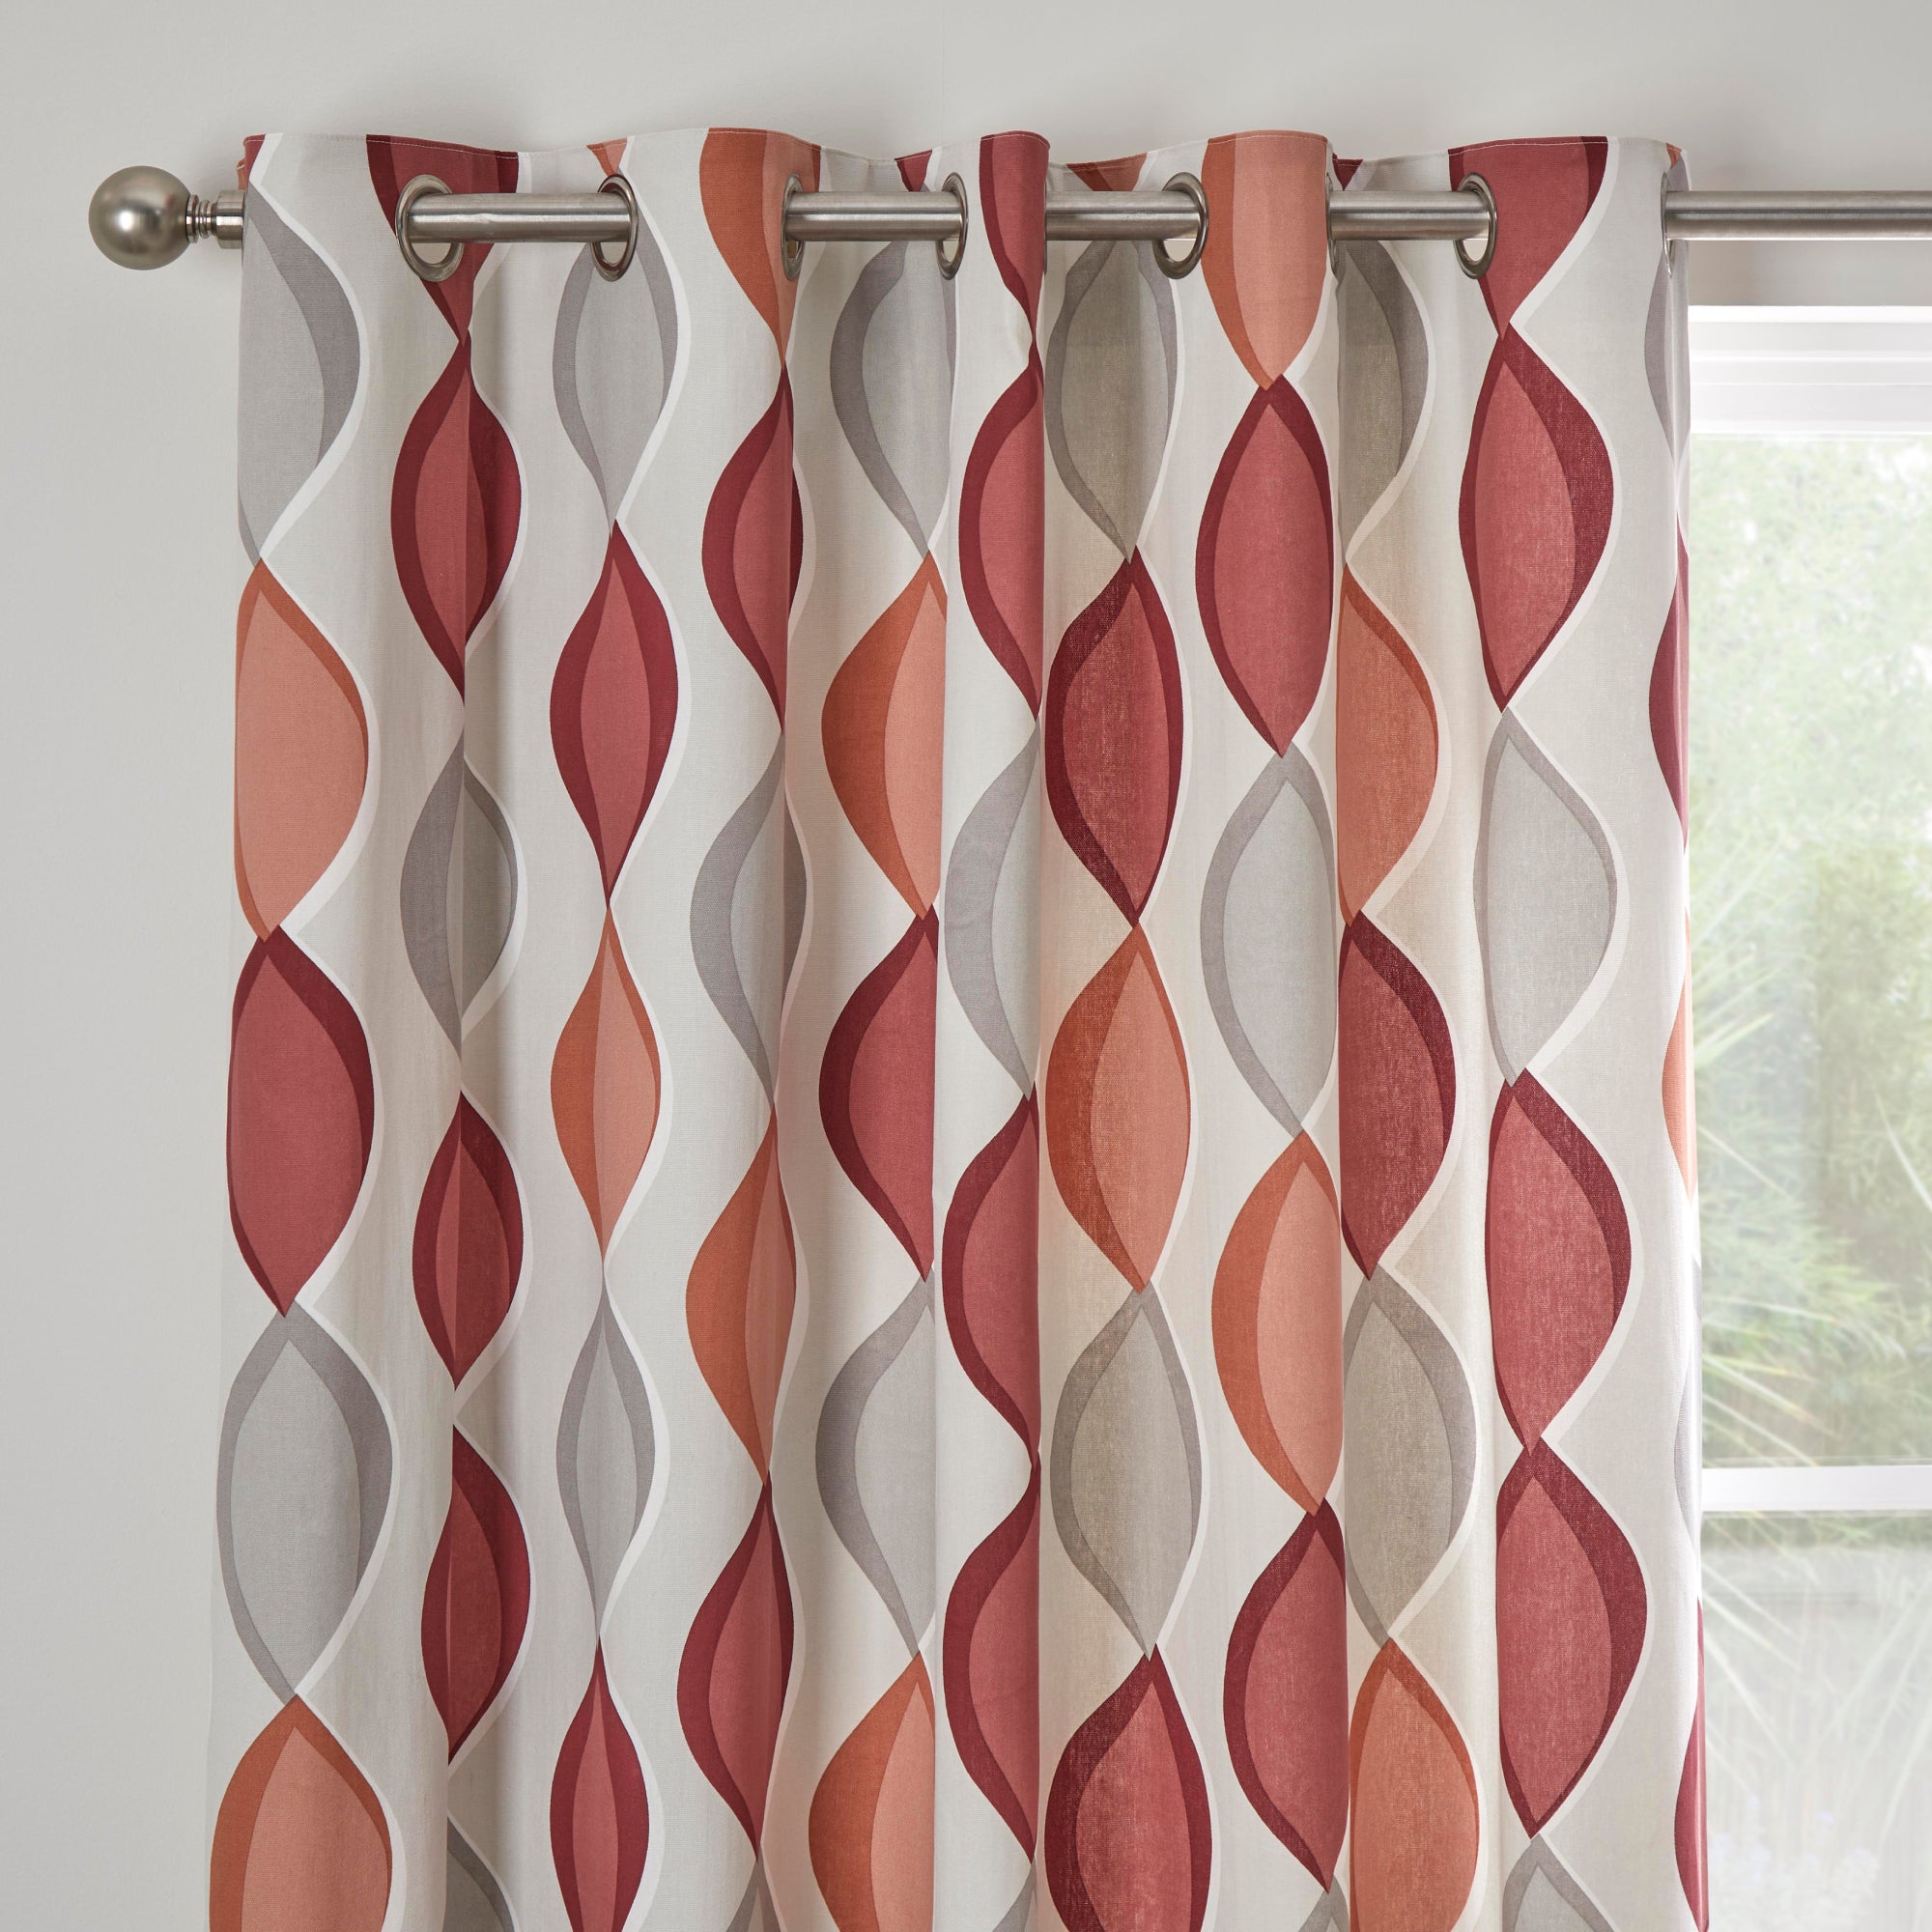 Pair of Eyelet Curtains Lennox by Fusion in Spice